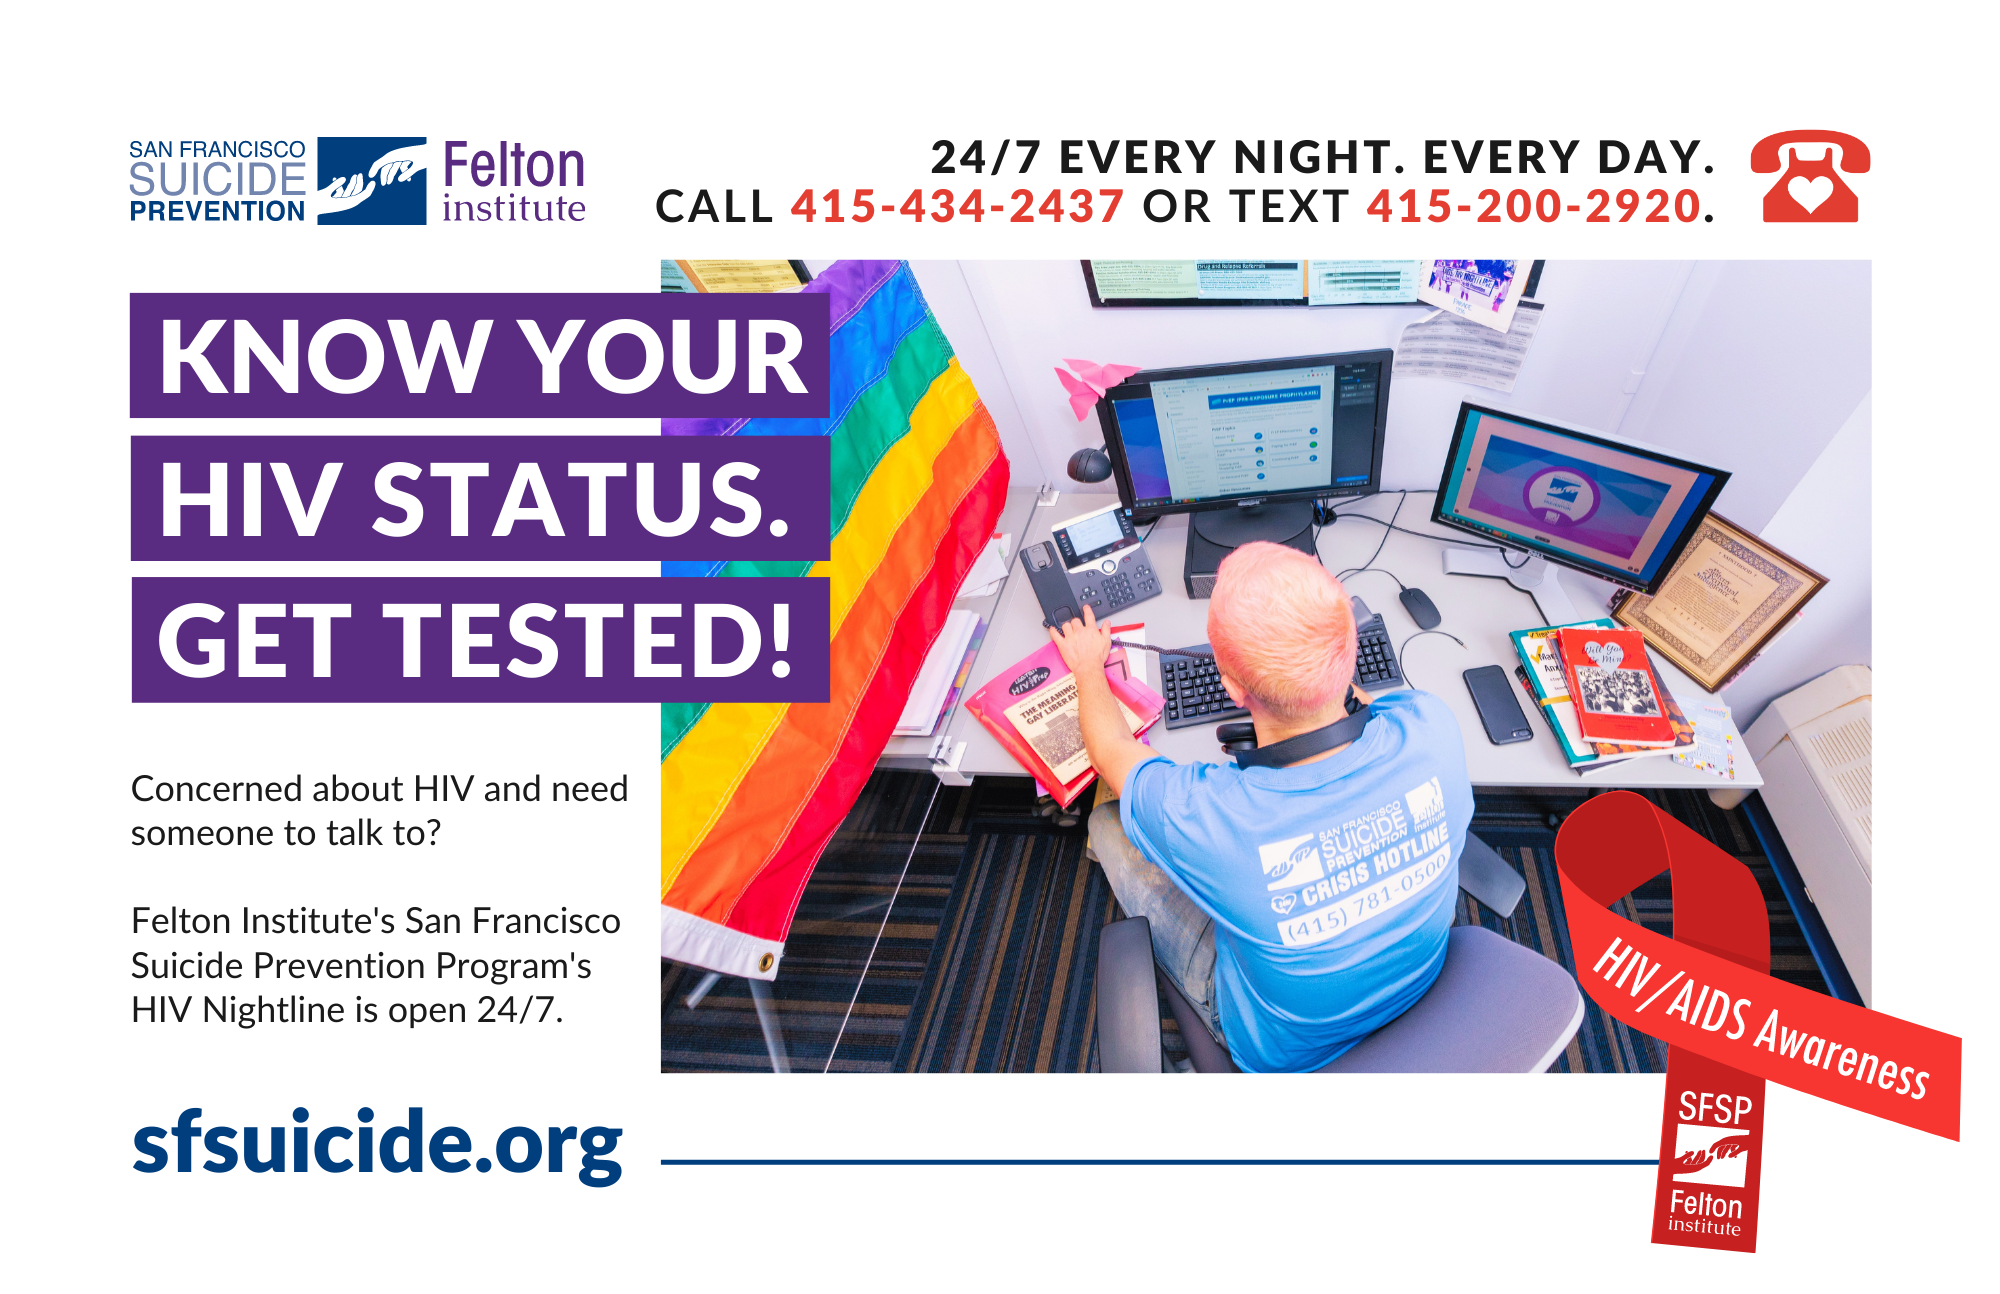 Know Your HIV Status. Get Tested! Concerned about HIV and need someone to talk to?  Felton Institute's San Francisco Suicide Prevention Program's HIV Nightline is open 24/7. Every Night. Every Day. Call 415-434-2437 or Text 415-200-2920.